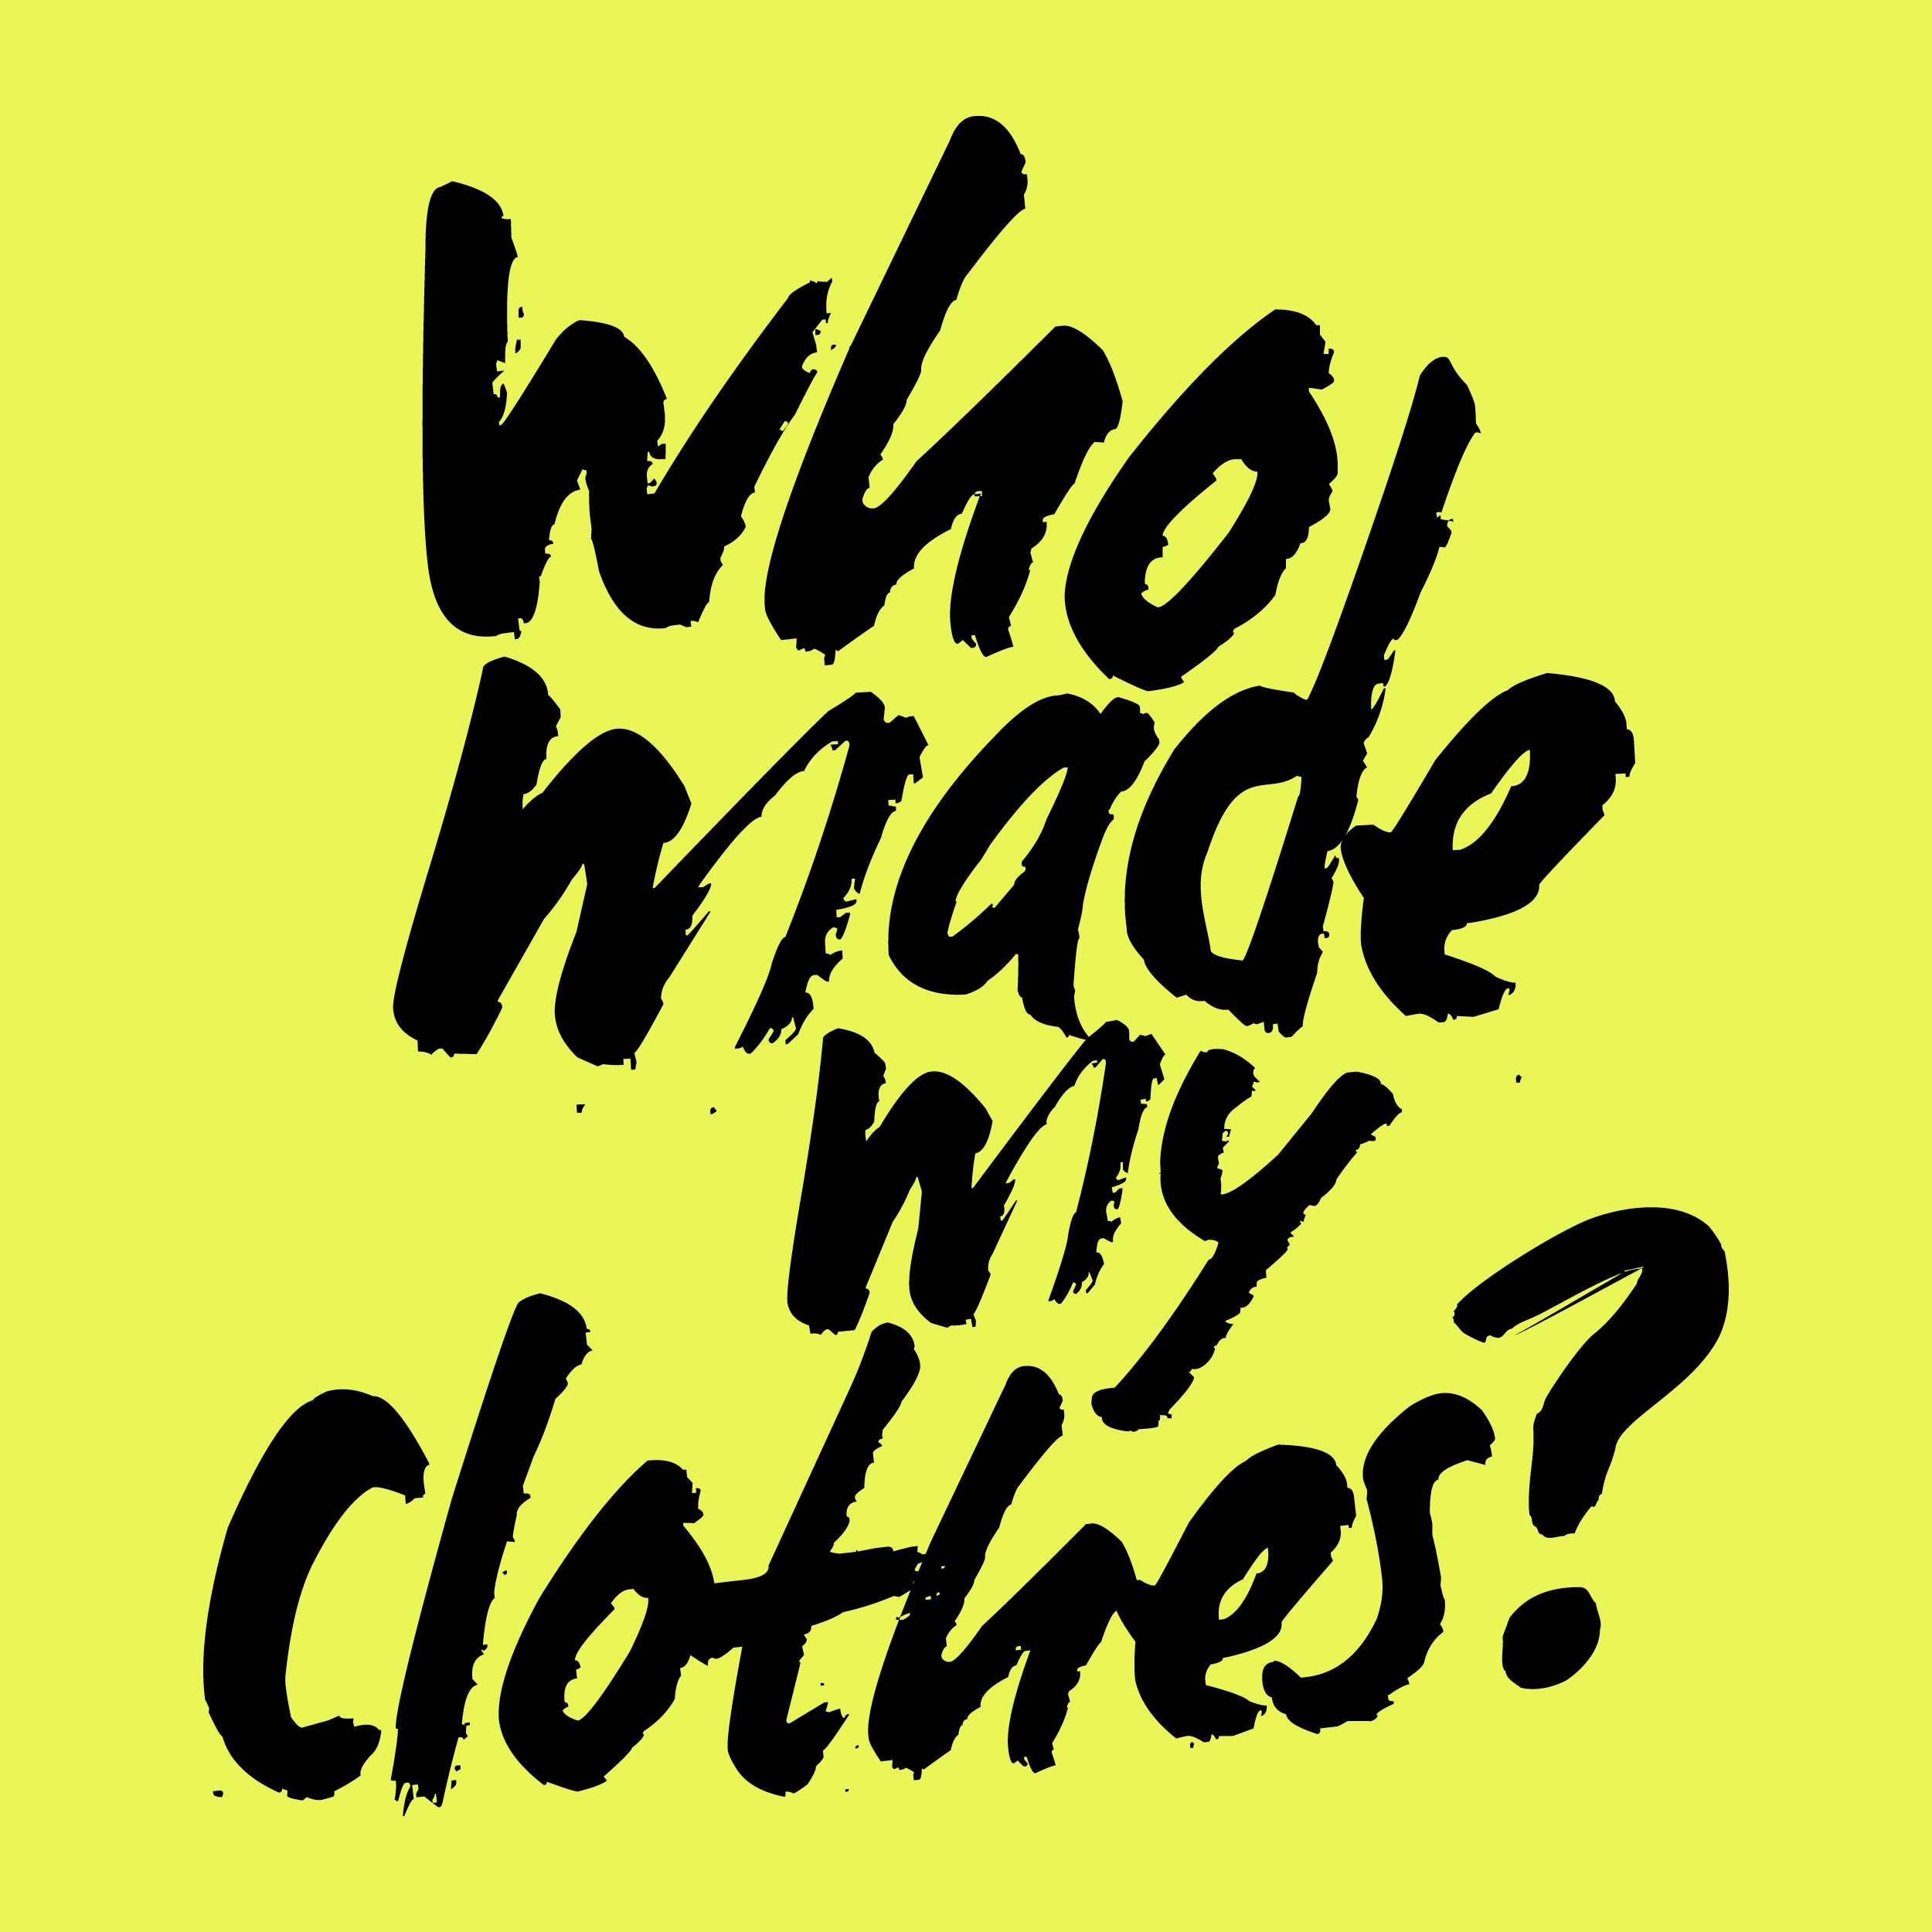 Fashion Revolution - Who made my clothes?